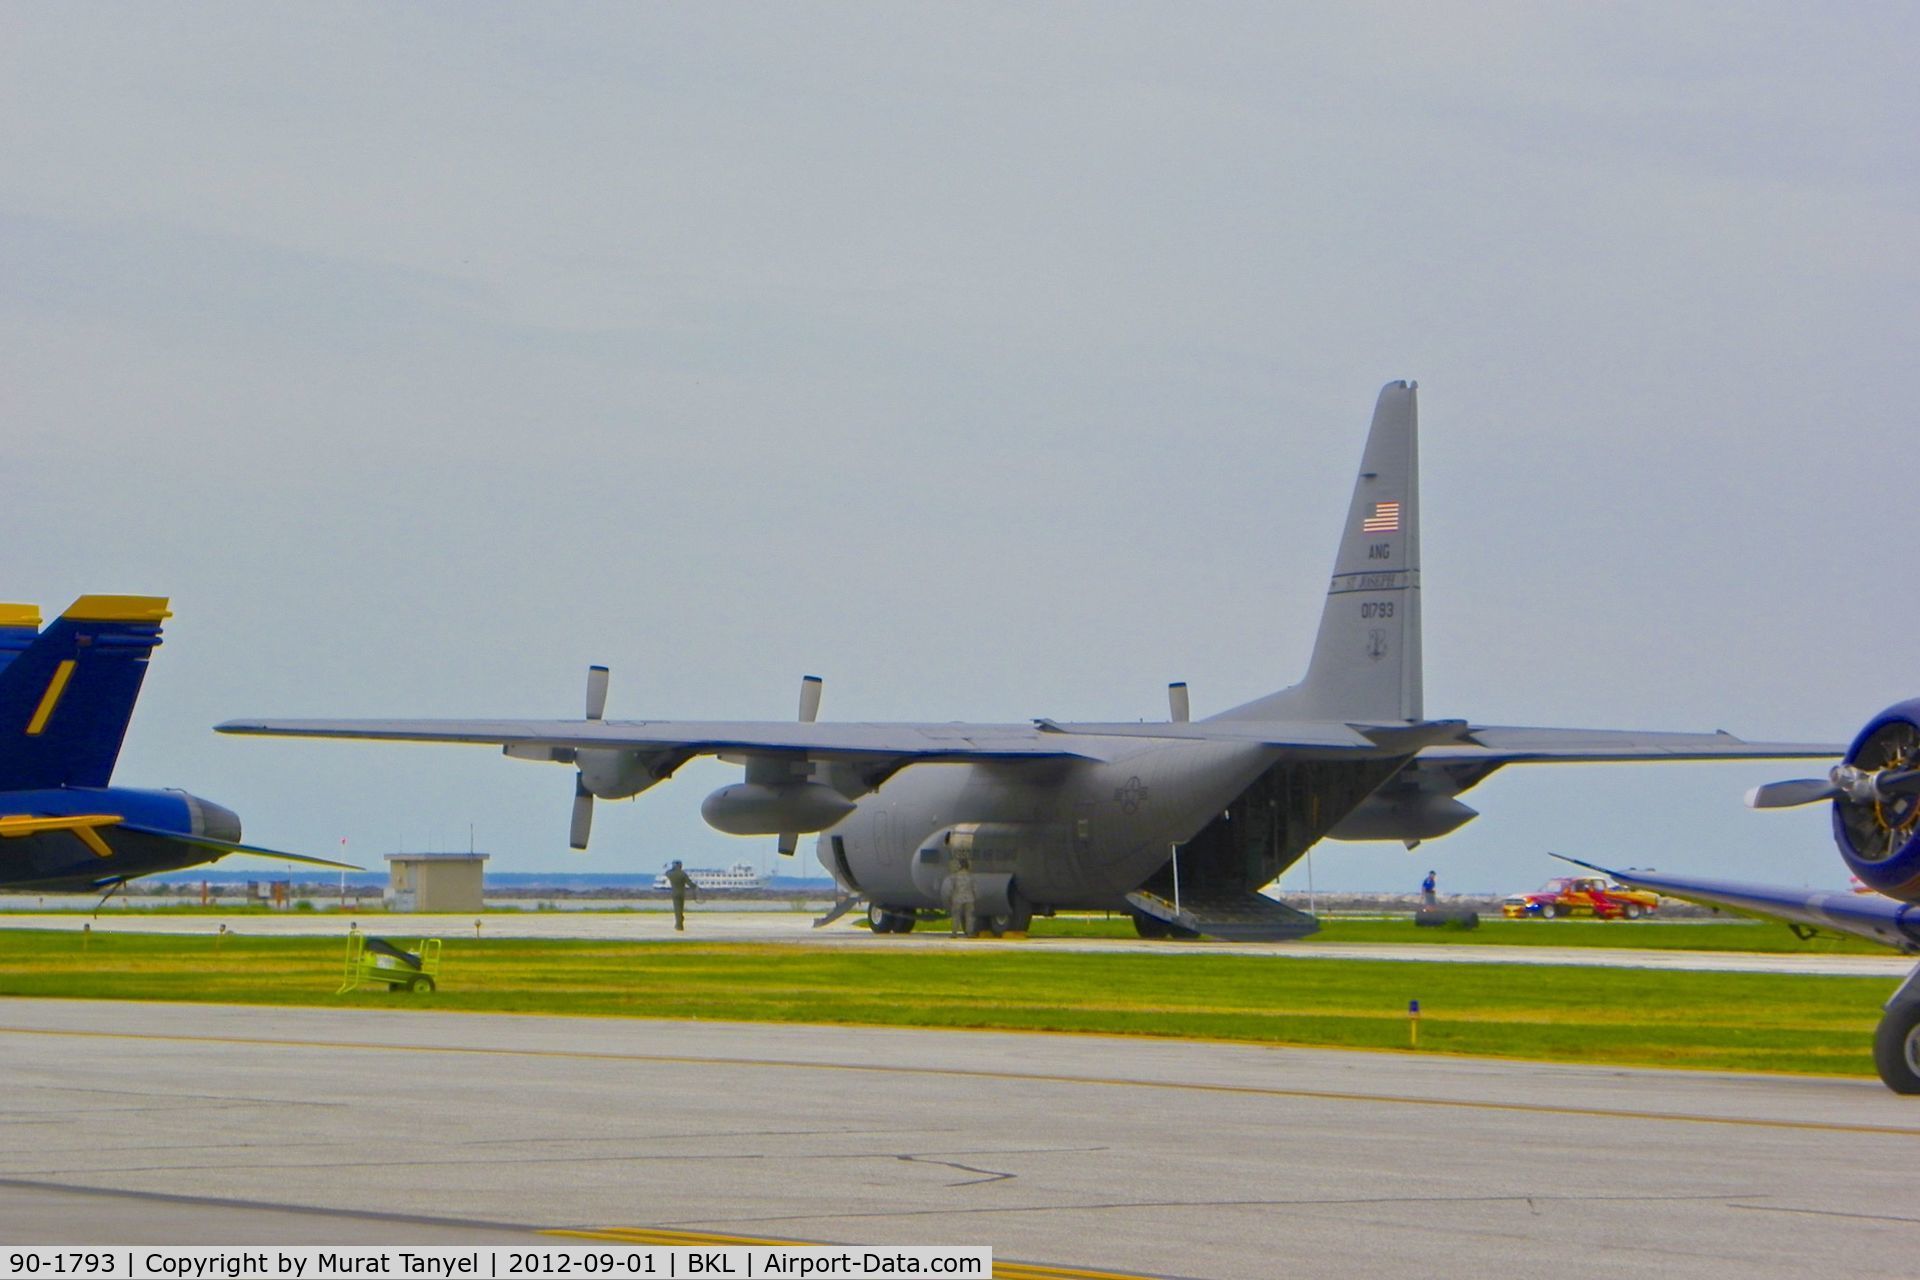 90-1793, 1990 Lockheed C-130H Hercules C/N 382-5246, Getting ready for the show